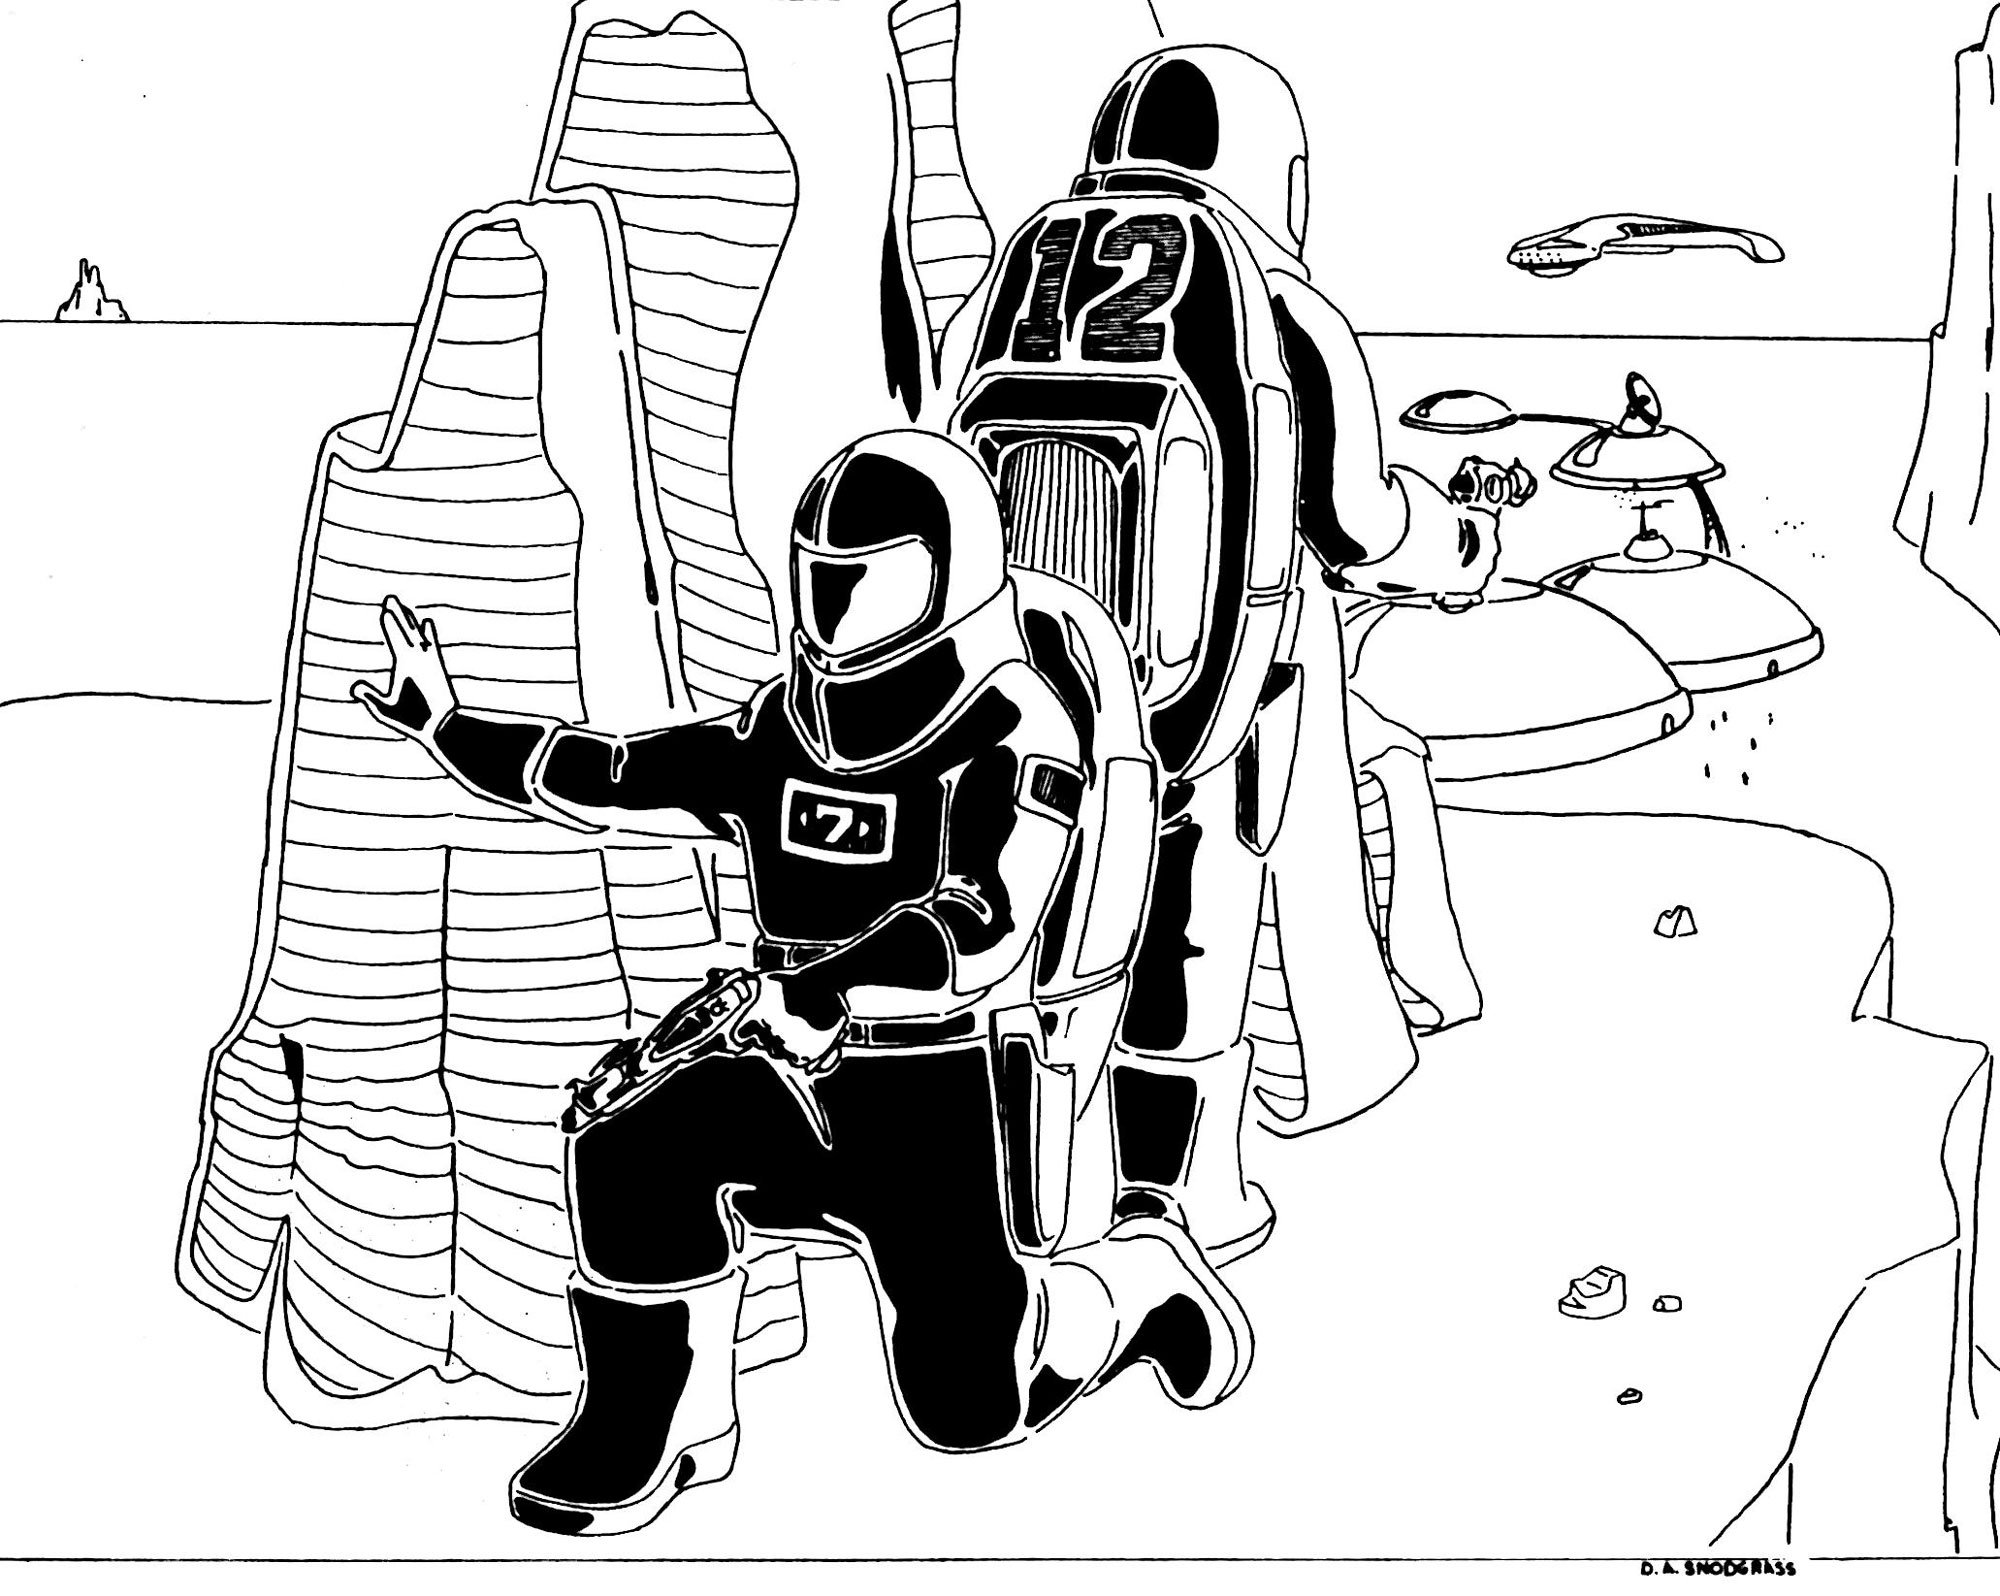  Retro black ink drawing of two armed scouts in spacesuits and helmets, overlooking an alien installation on a barren world. Artist David Snodgrass. 